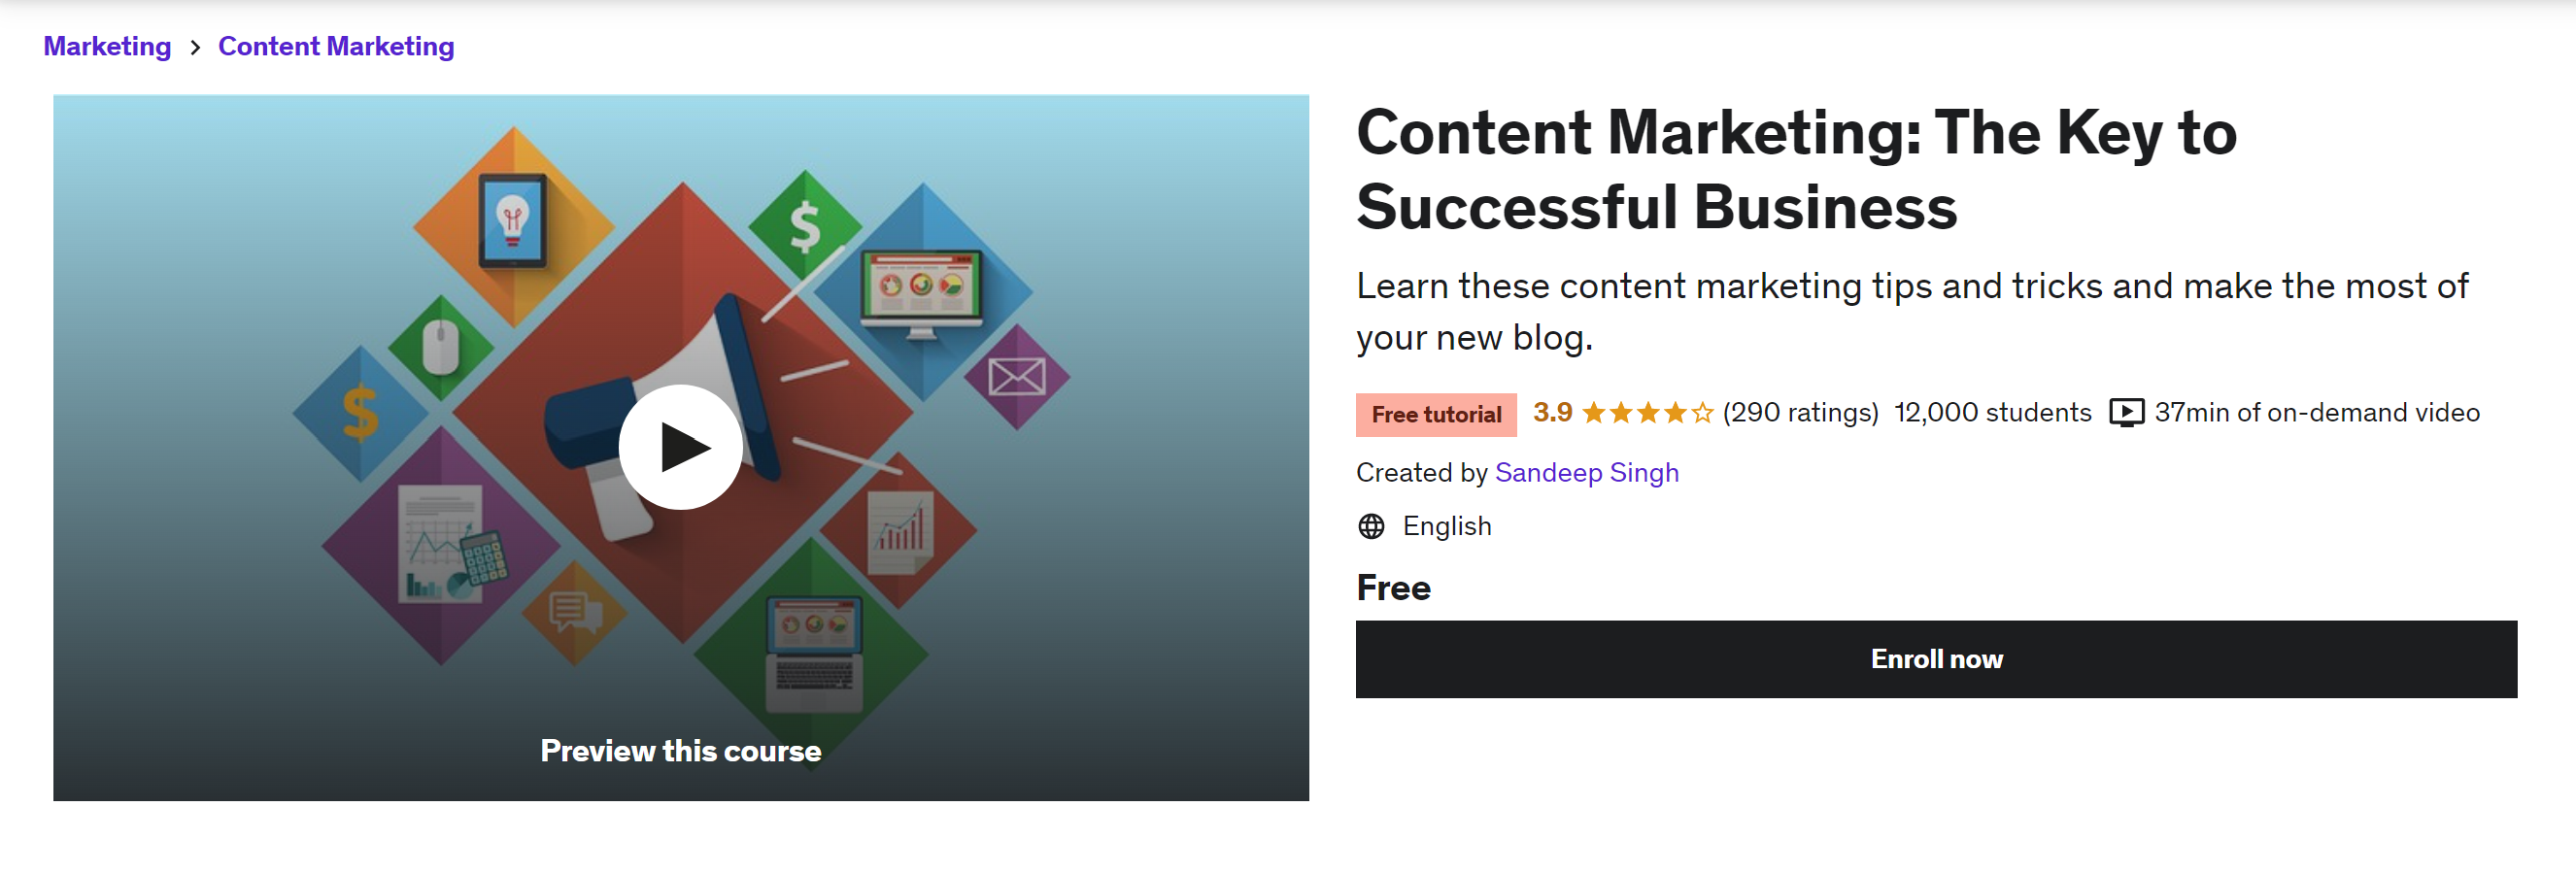 Content Marketing - the Key to a Successful Business